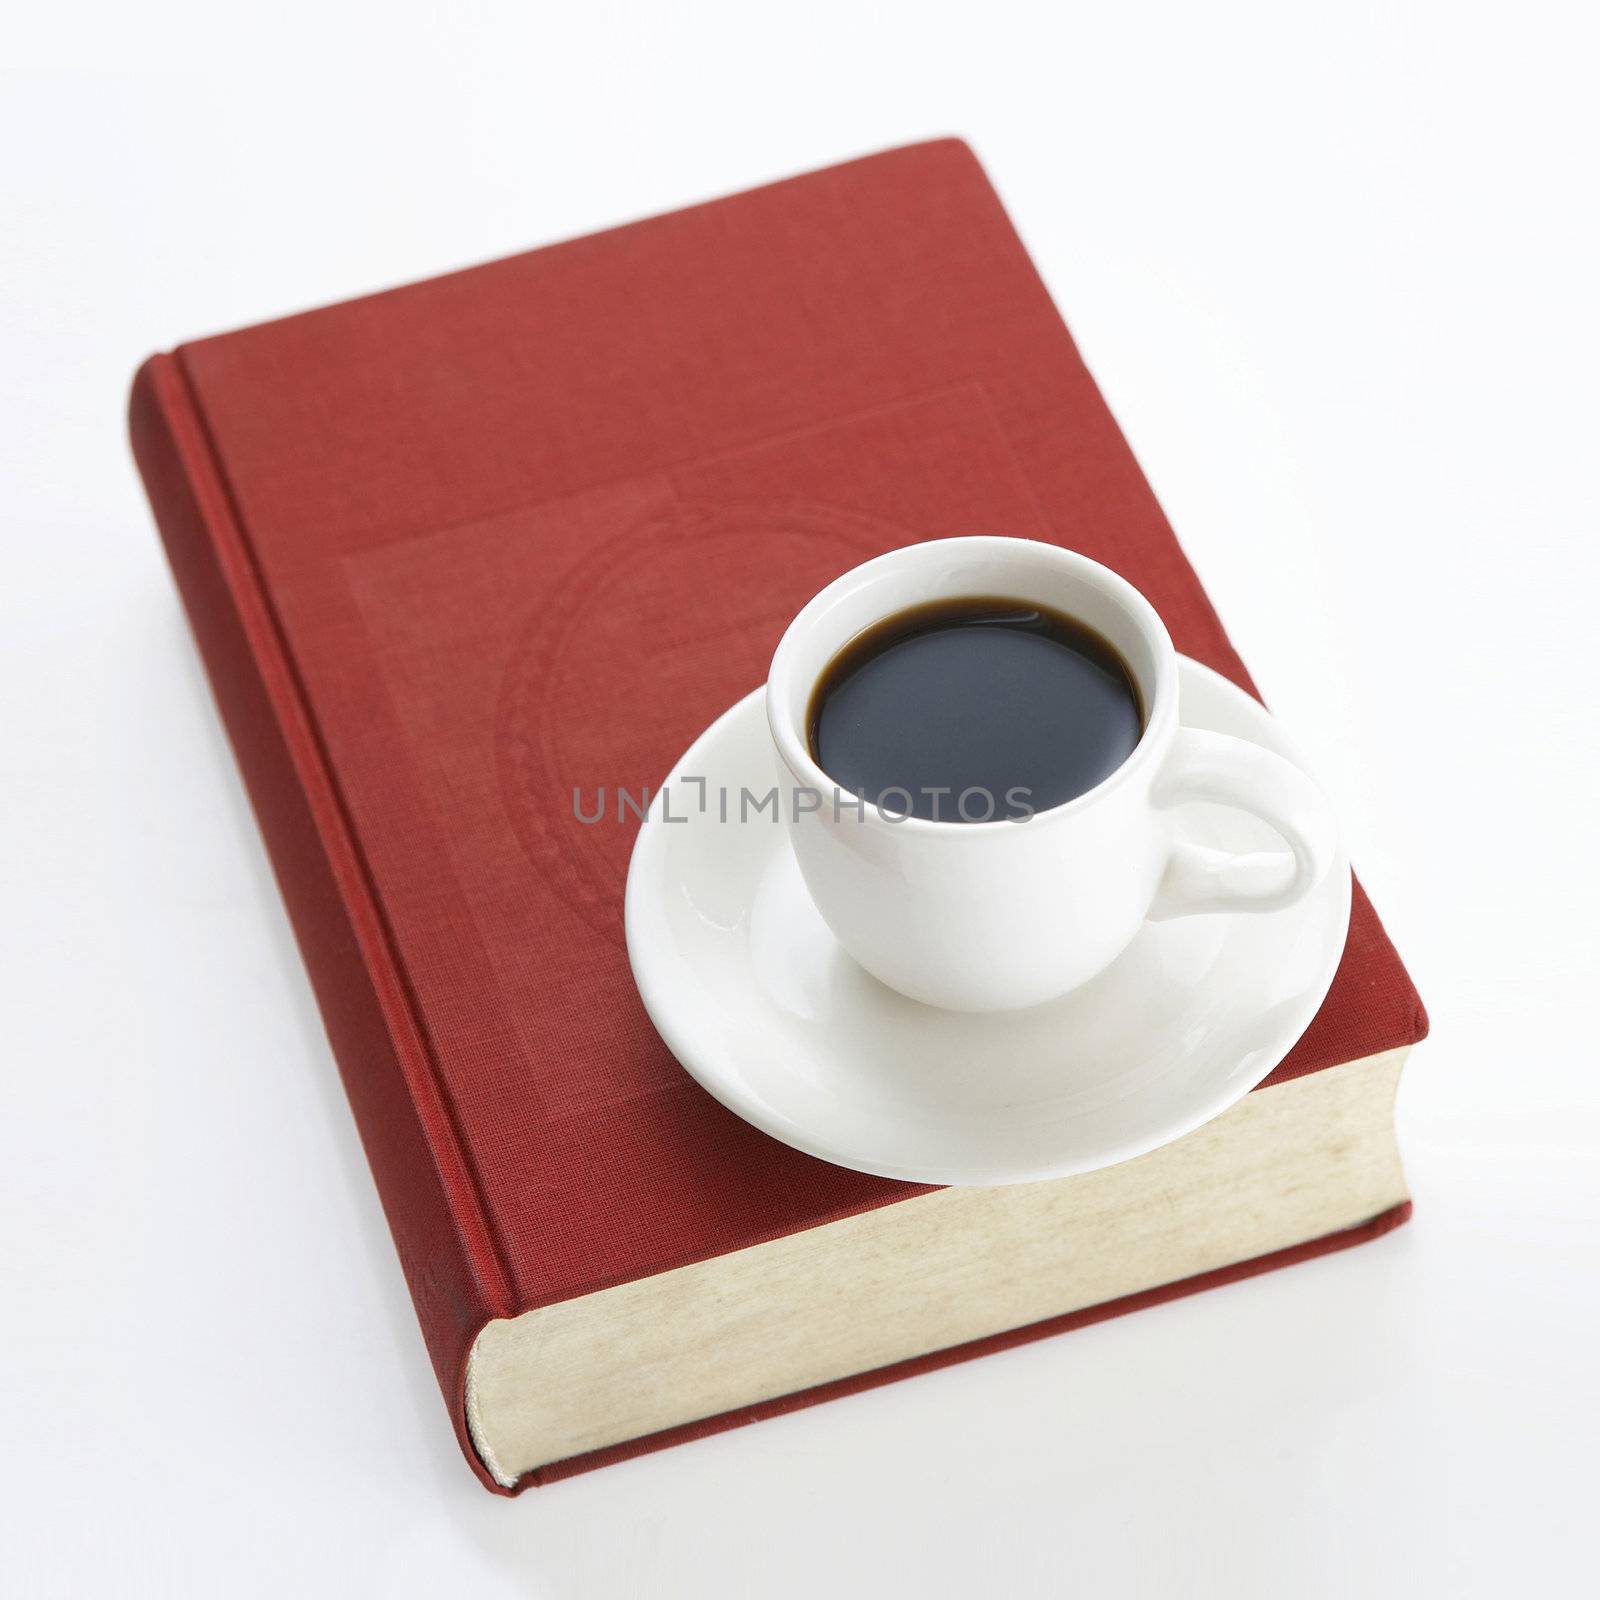 A cup of coffee on the book